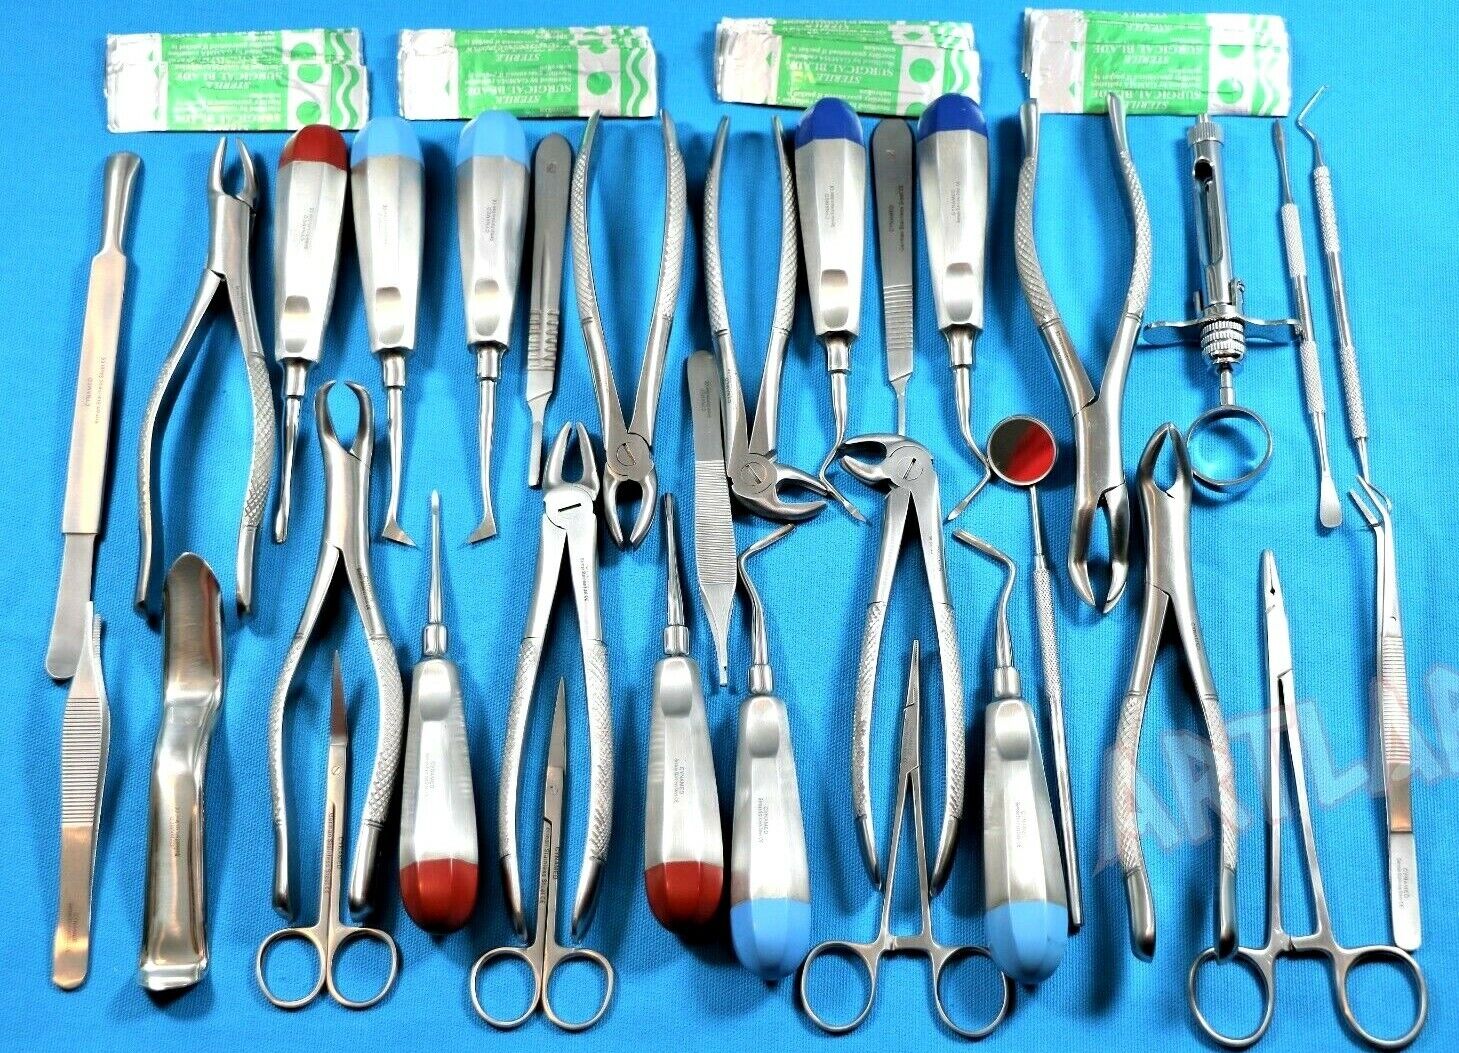 NEW GERMAN 72 PC ORAL SURGERY DENTAL EXTRACTING ELEVATORS FORCEPS INSTRUMENT KIT